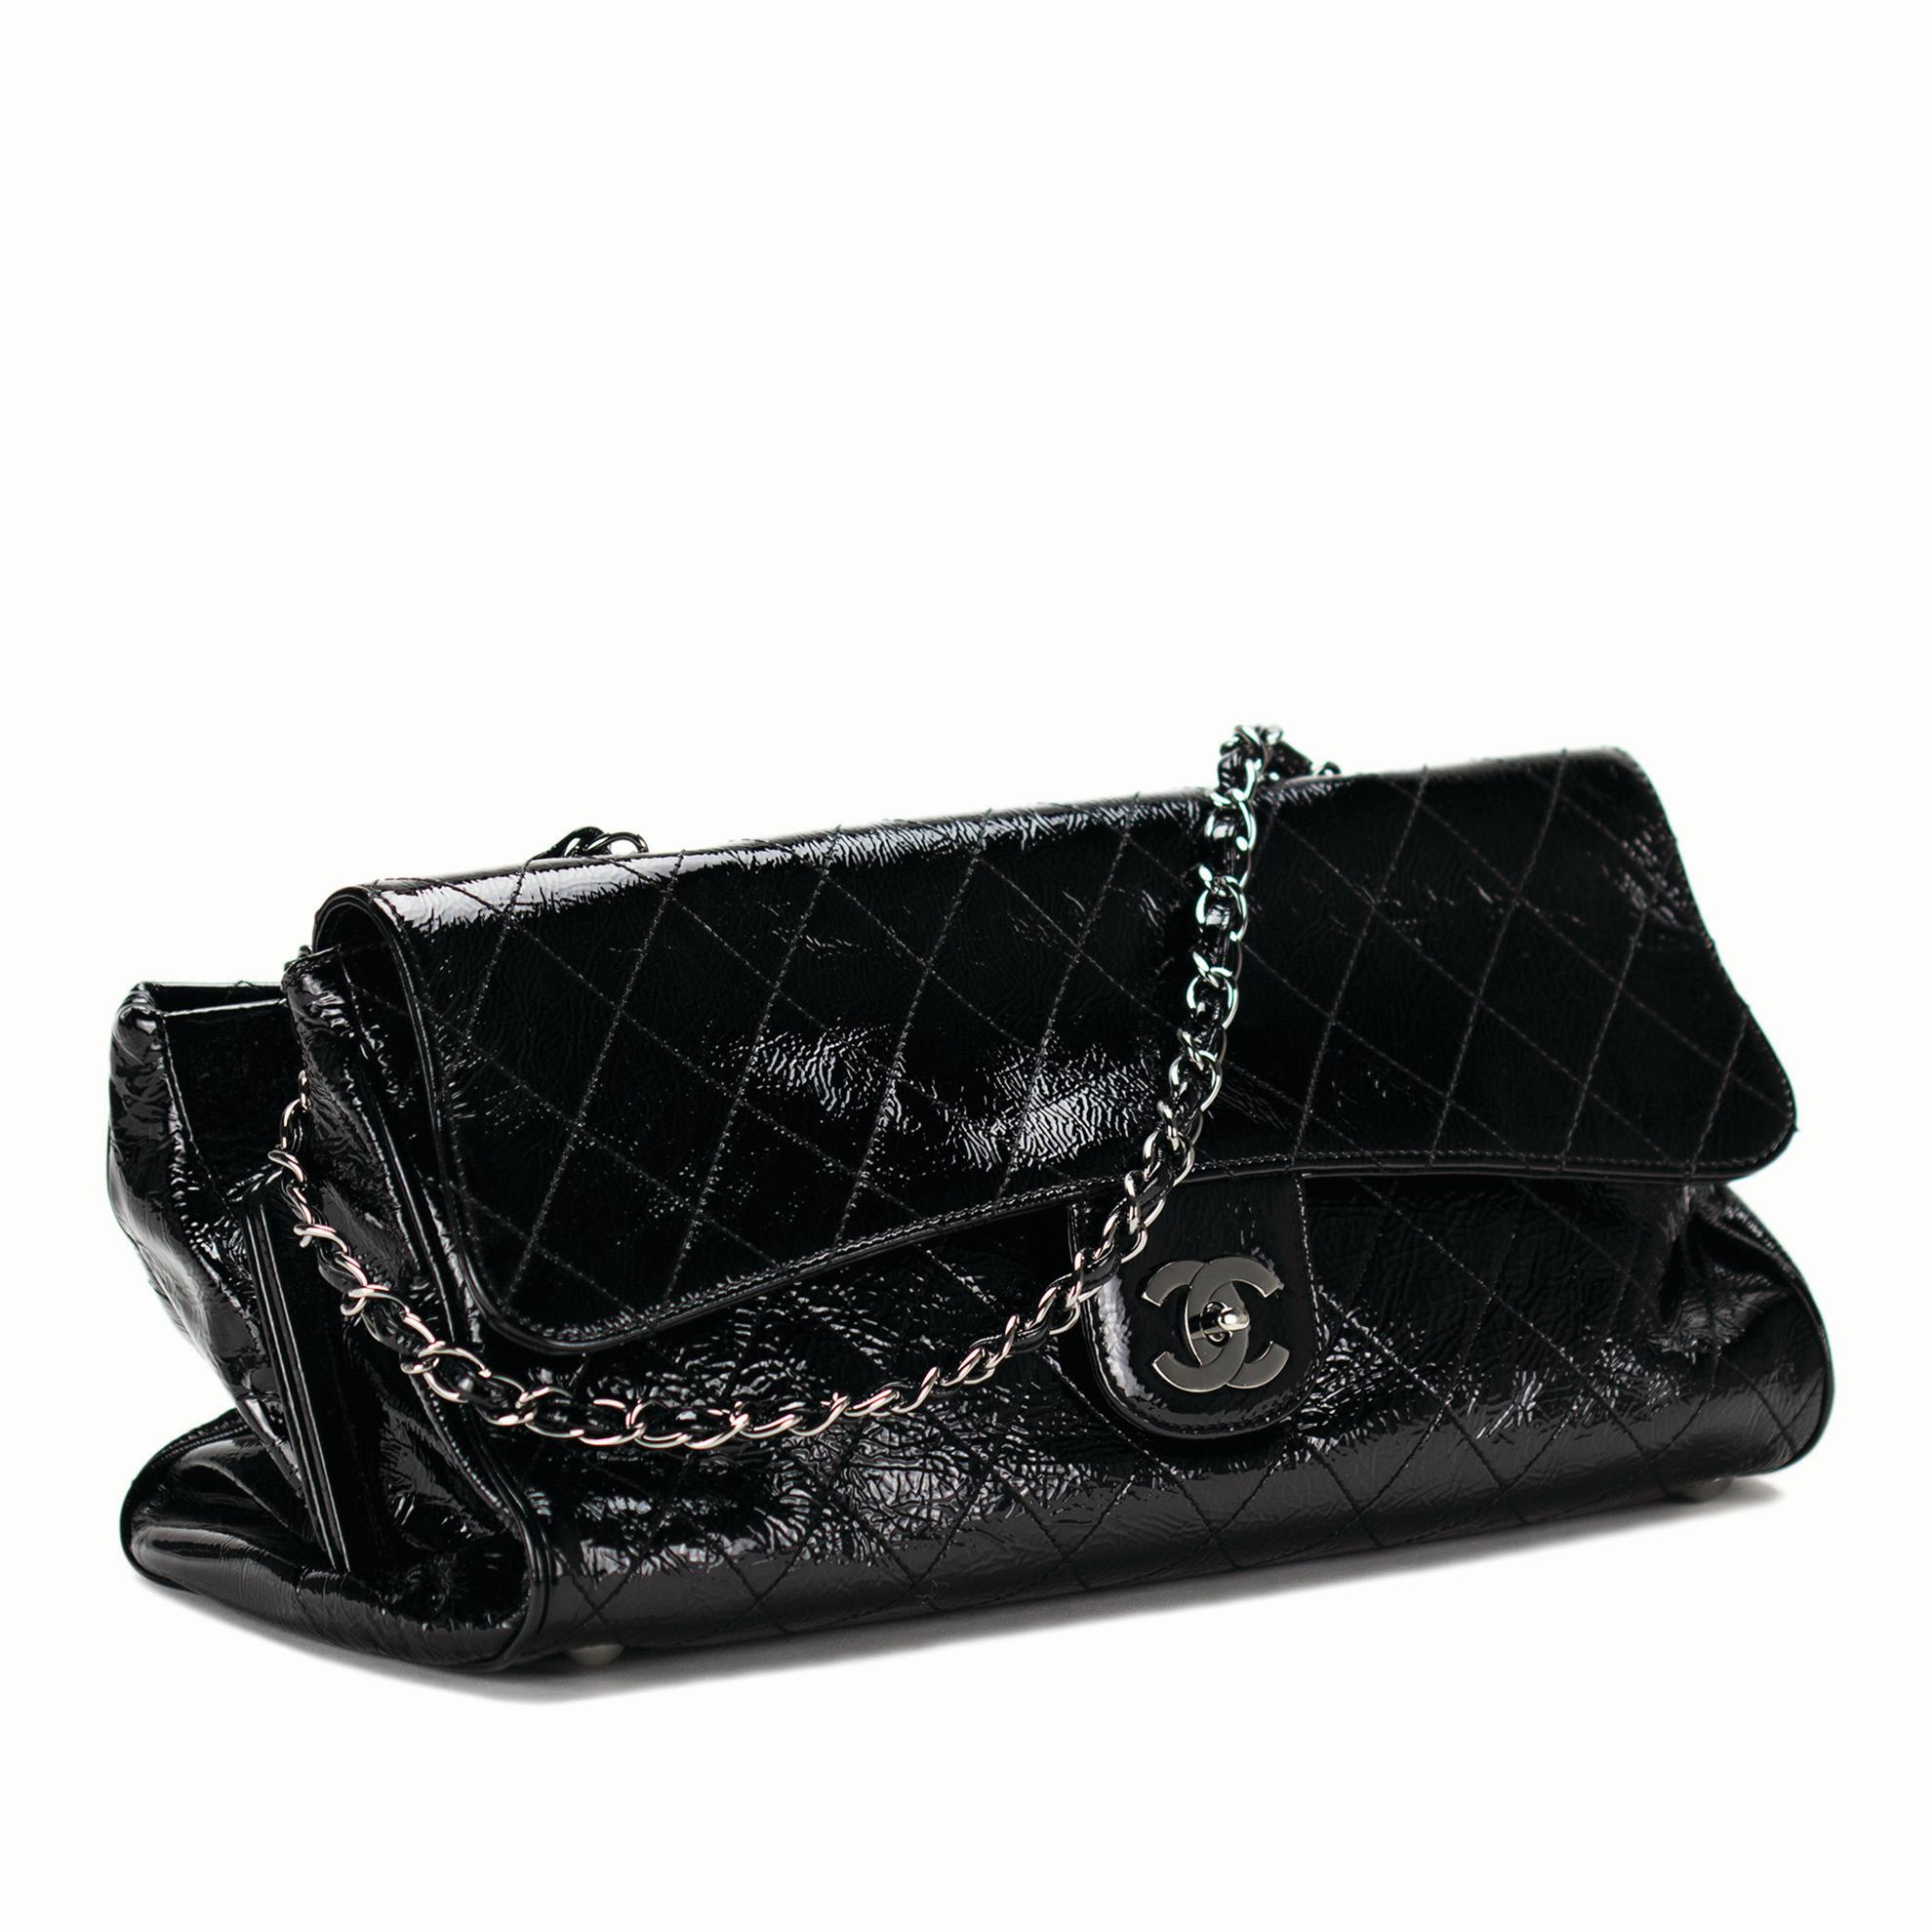 Black Chanel 2006 Large Classic Flap Patent Kiss-lock Multi Compartment Tote Bag For Sale